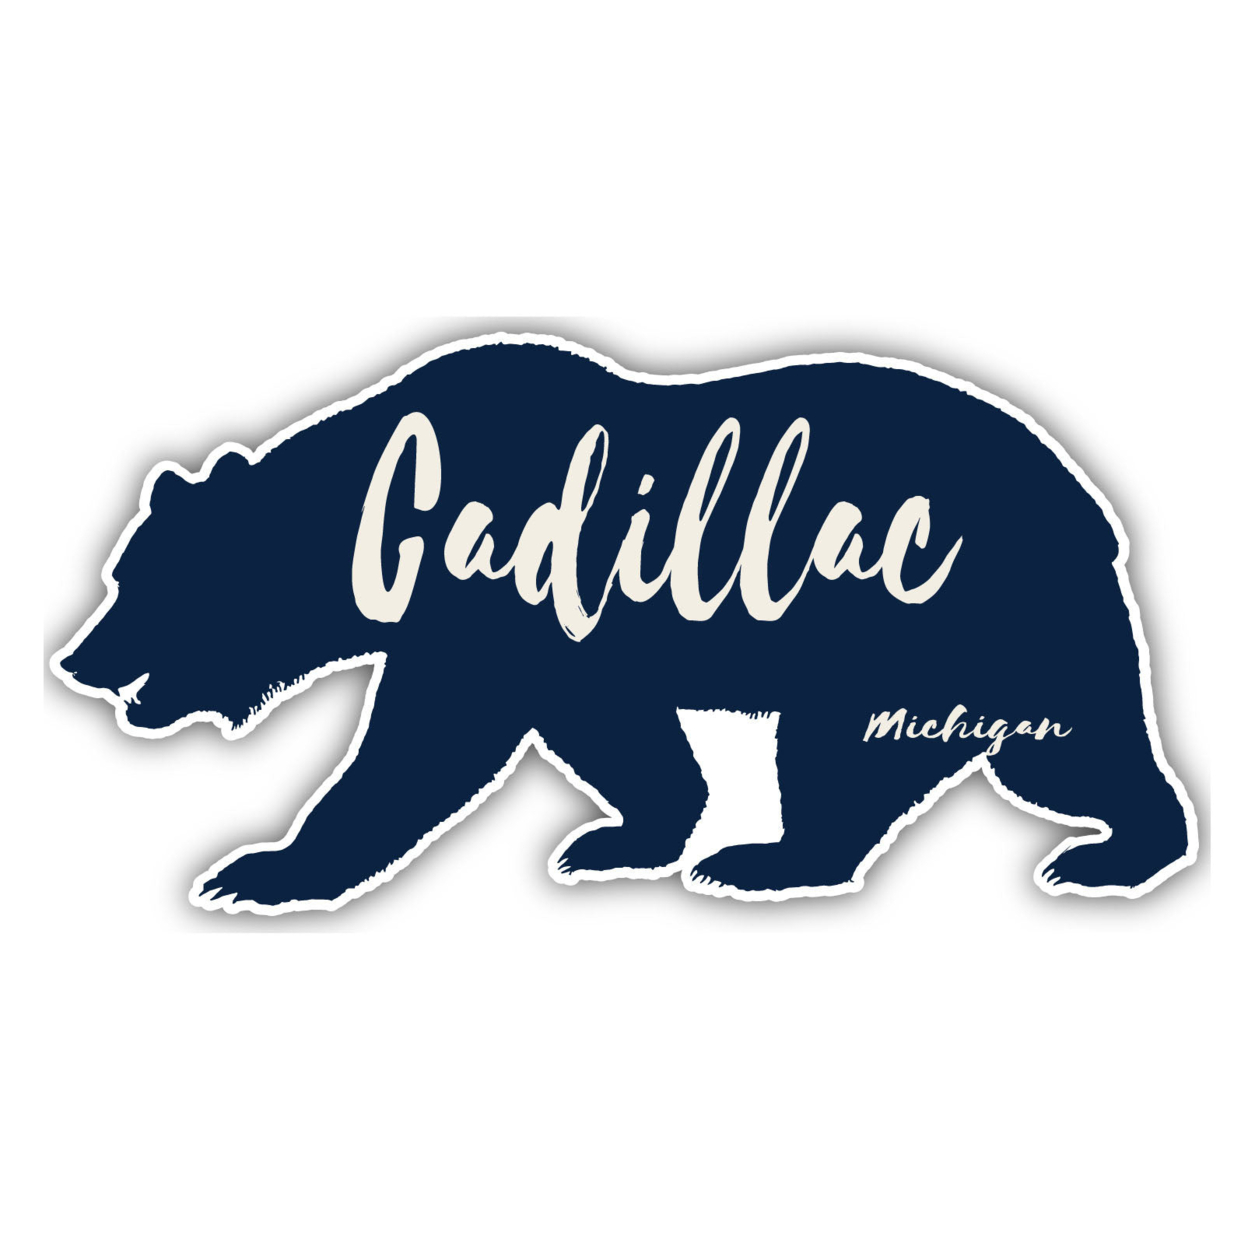 Cadillac Michigan Souvenir Decorative Stickers (Choose Theme And Size) - Single Unit, 10-Inch, Great Outdoors